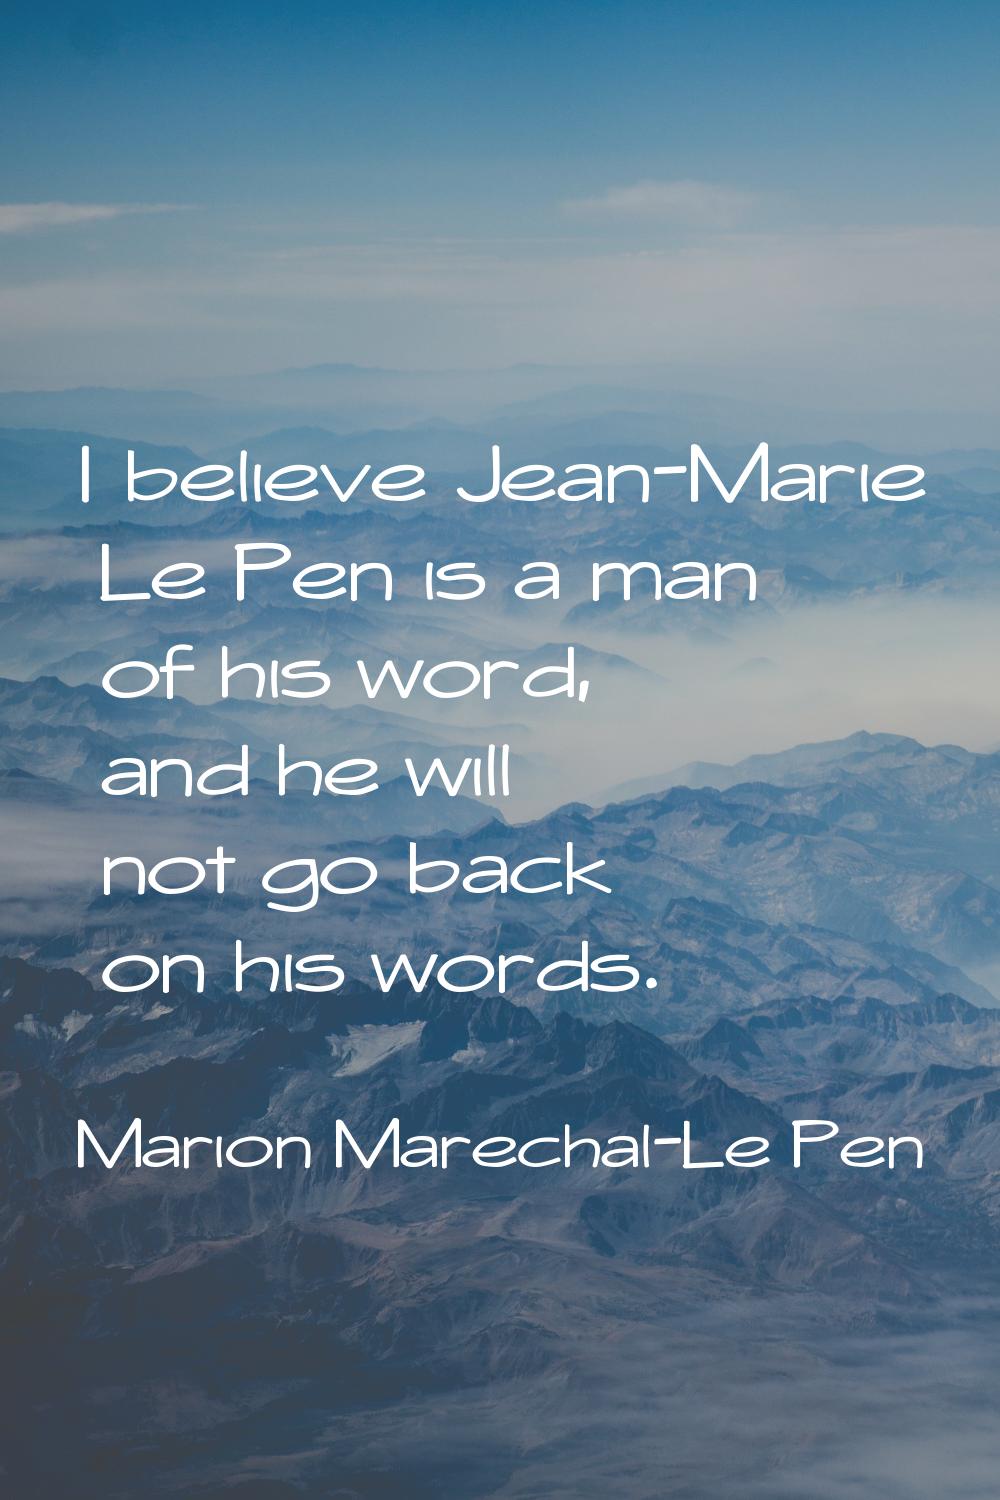 I believe Jean-Marie Le Pen is a man of his word, and he will not go back on his words.